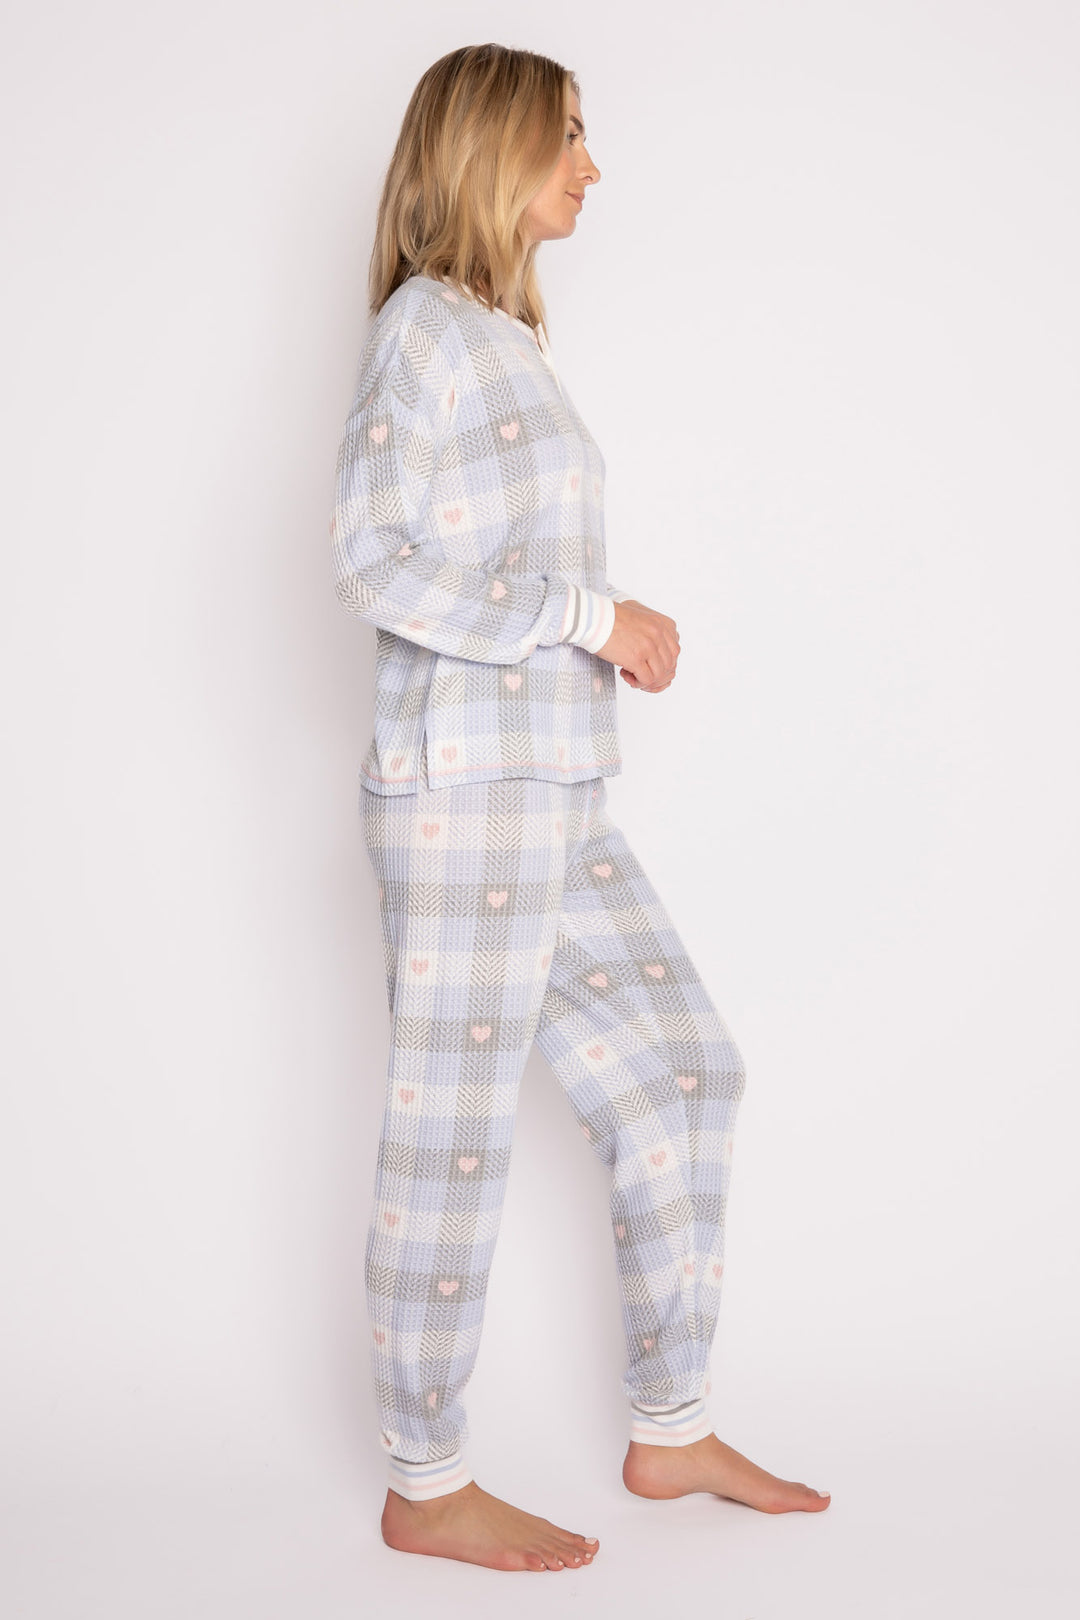 Ivory-blue-grey plaid & heart-printed waffle pajama set. 3-button Henley top & jammie pant. Striped cuffs. (7257680707684)